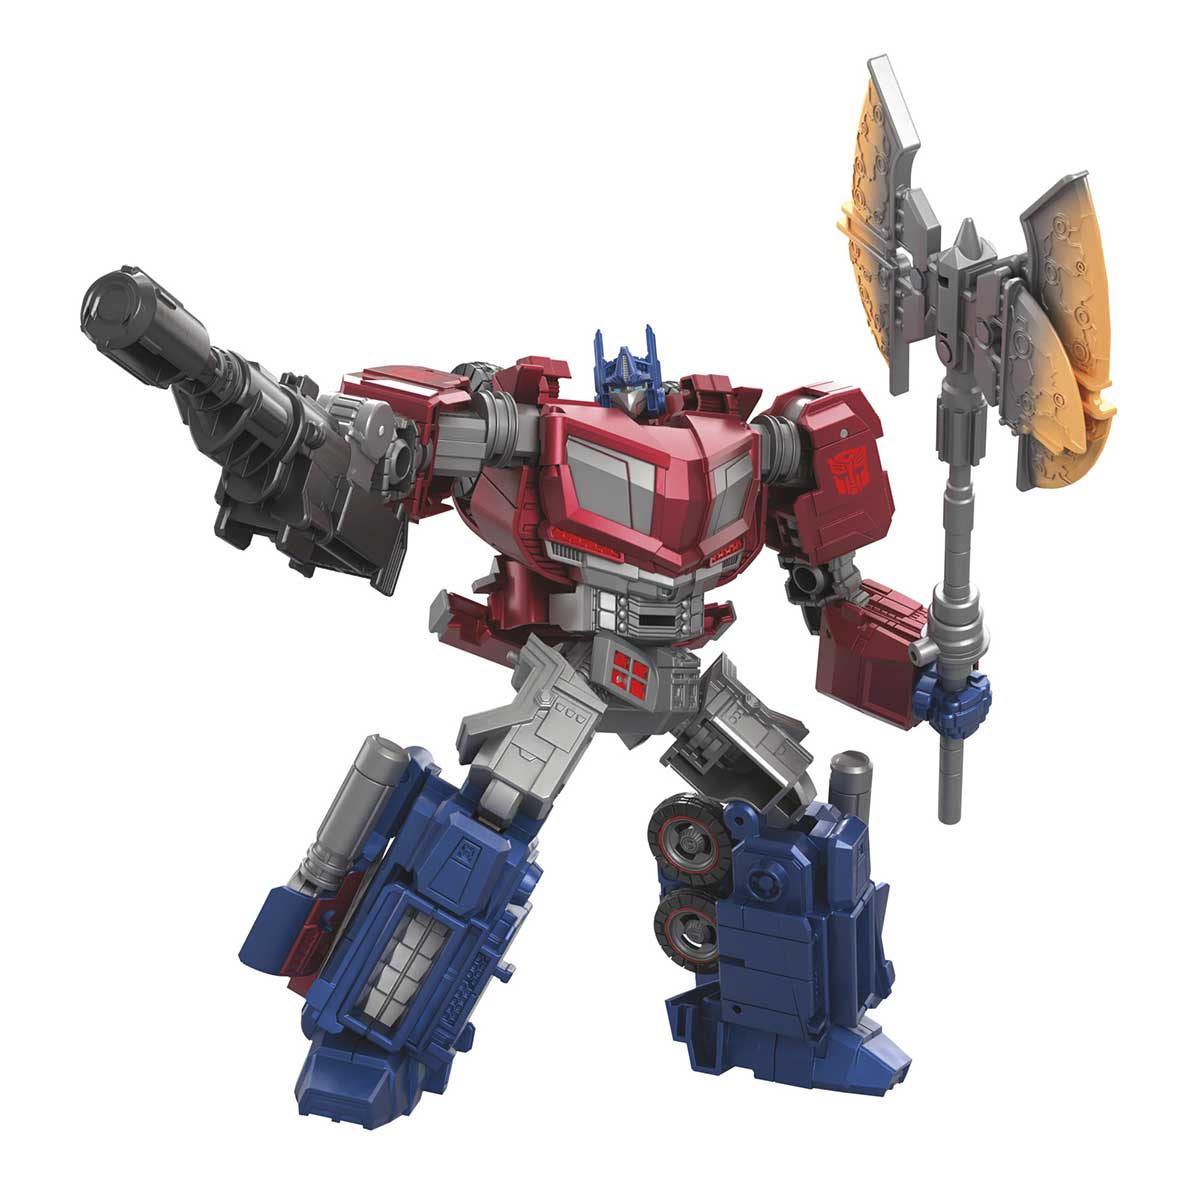 New Transformers action figures based on War for Cybertron video